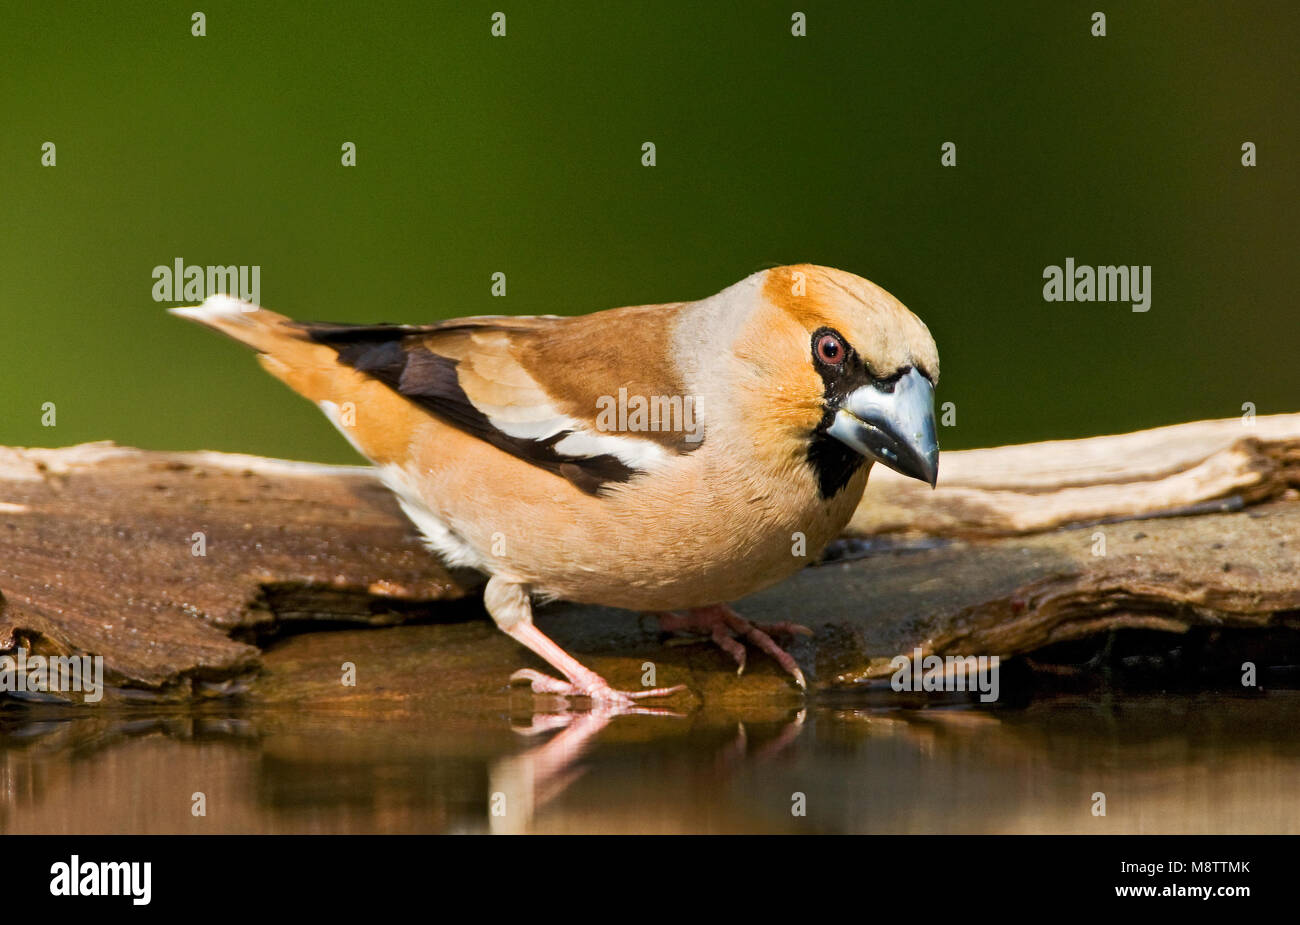 Appelvink, Hawfinch, Coccothraustes coccothraustes Stock Photo